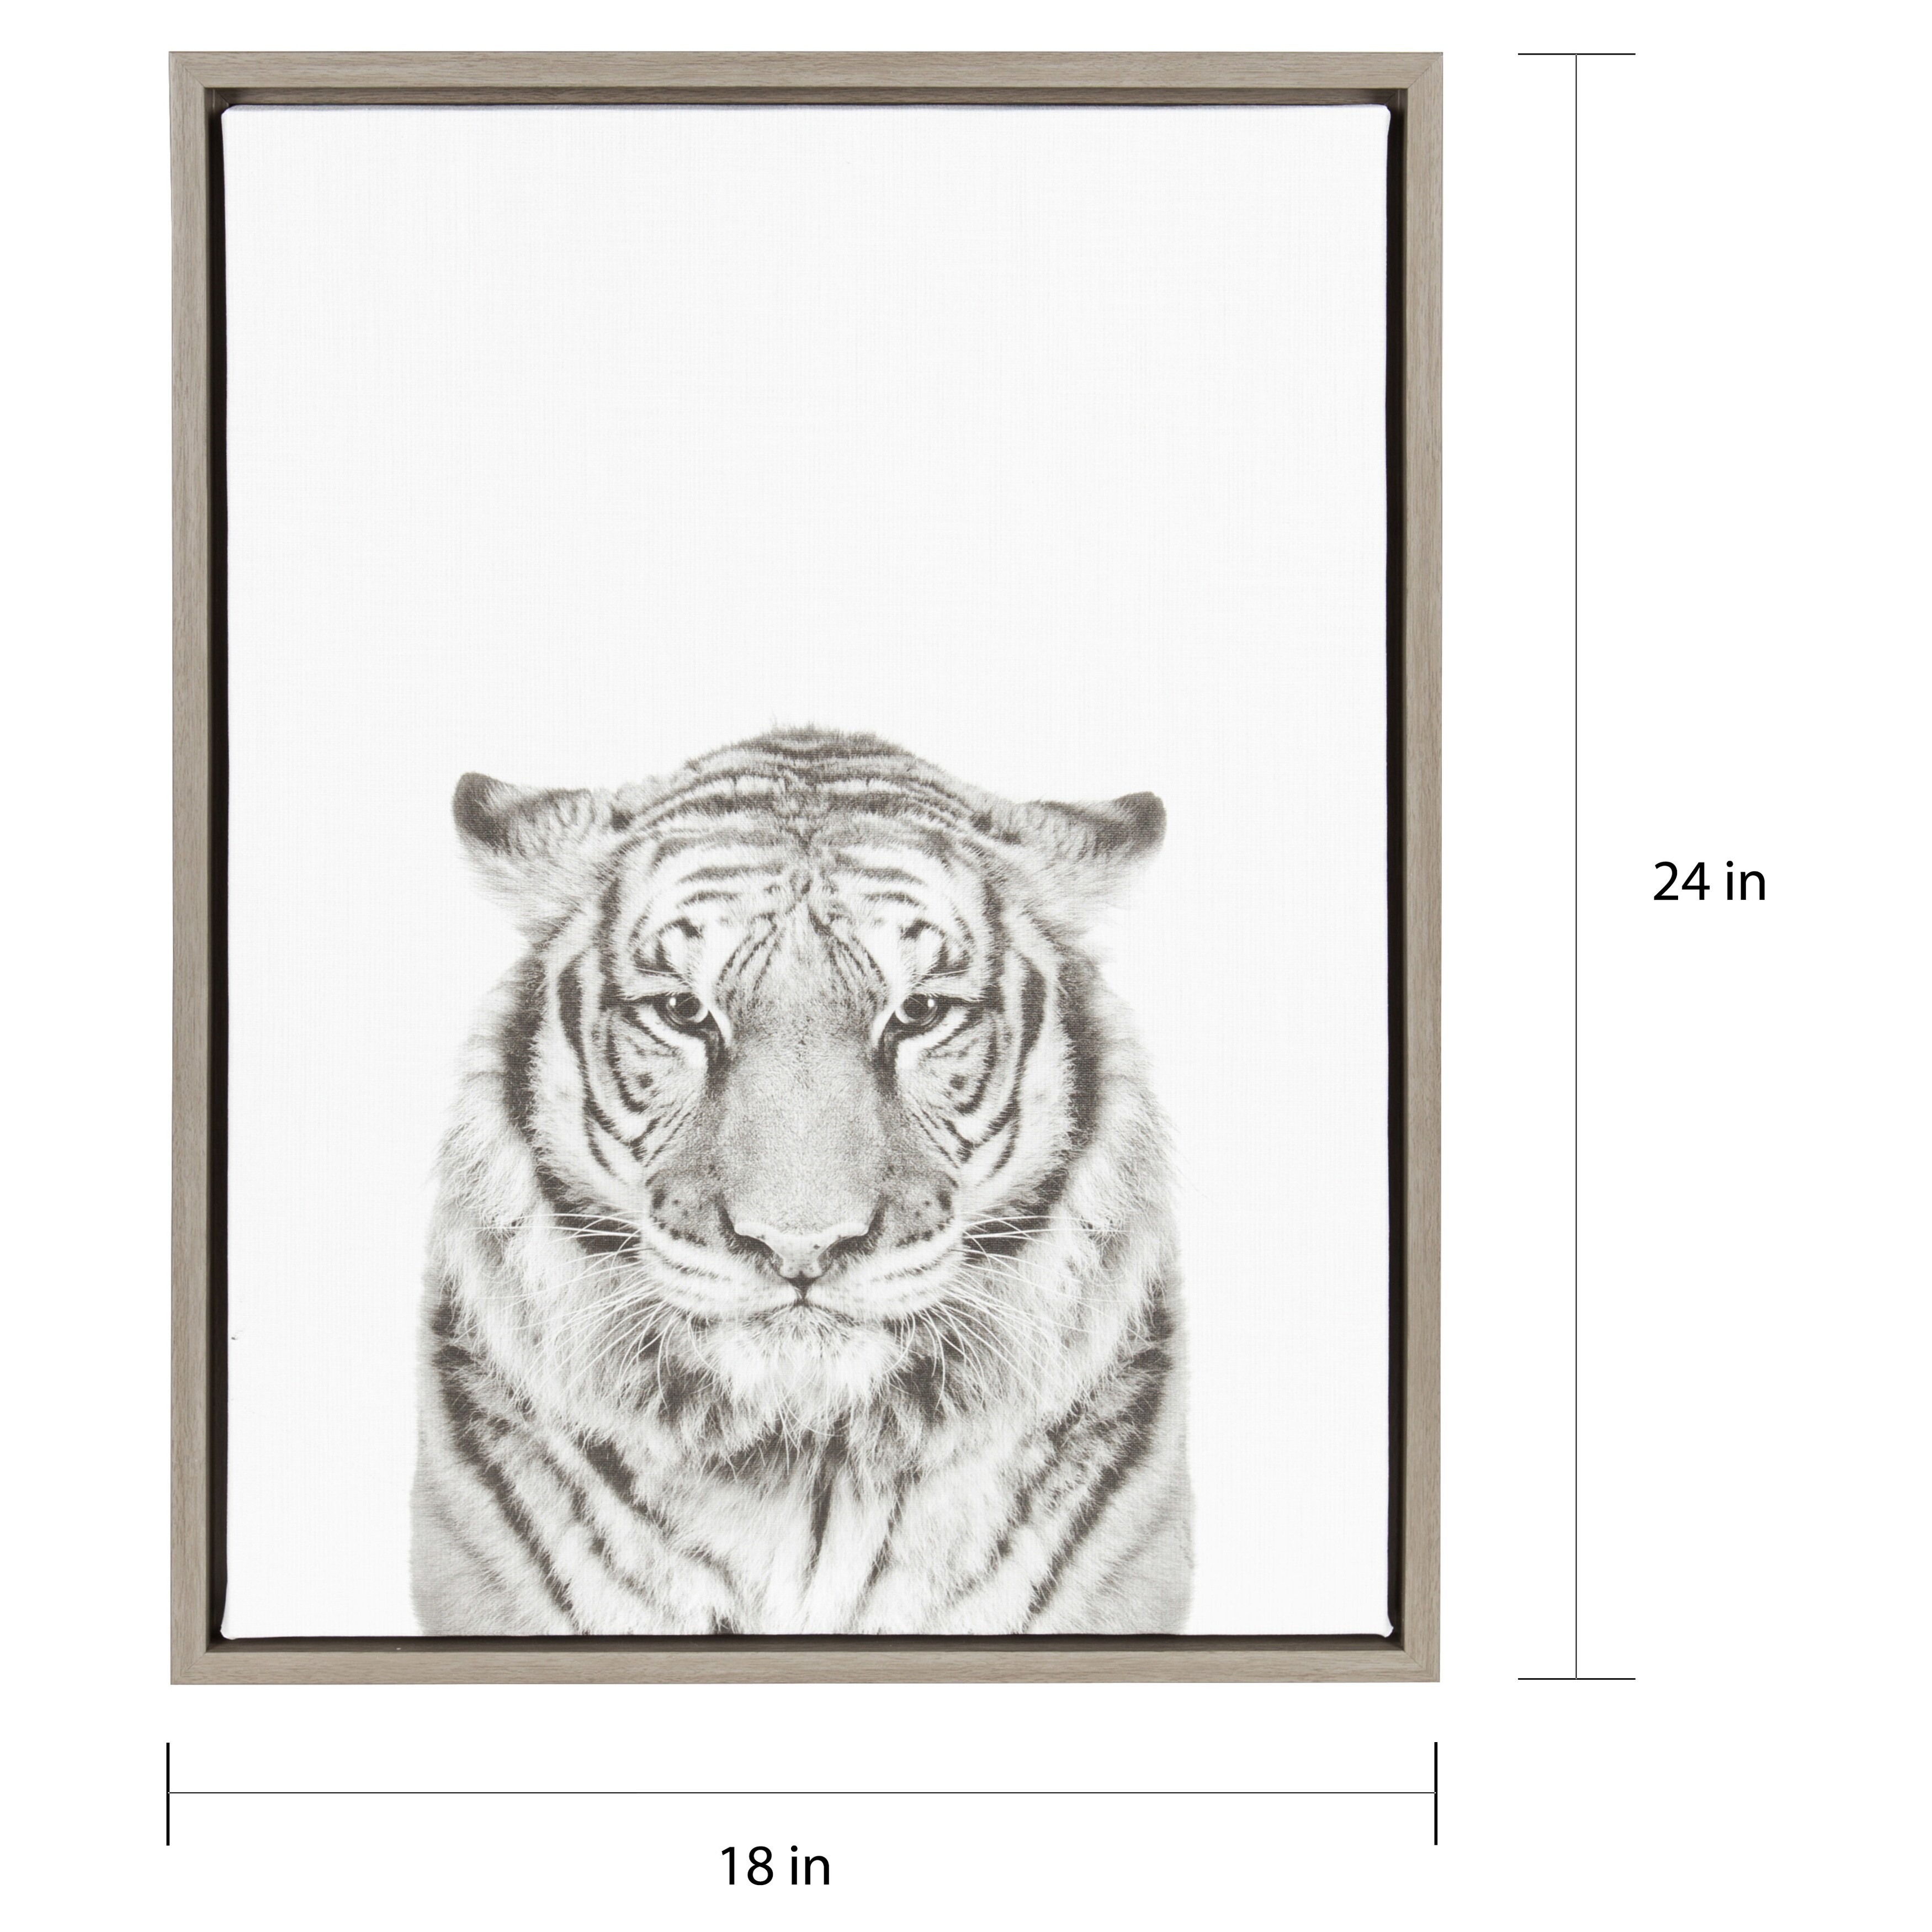 Tiger Wild ANIMALS  Canvas Art Print Box Framed Picture Wall Hanging BBD 